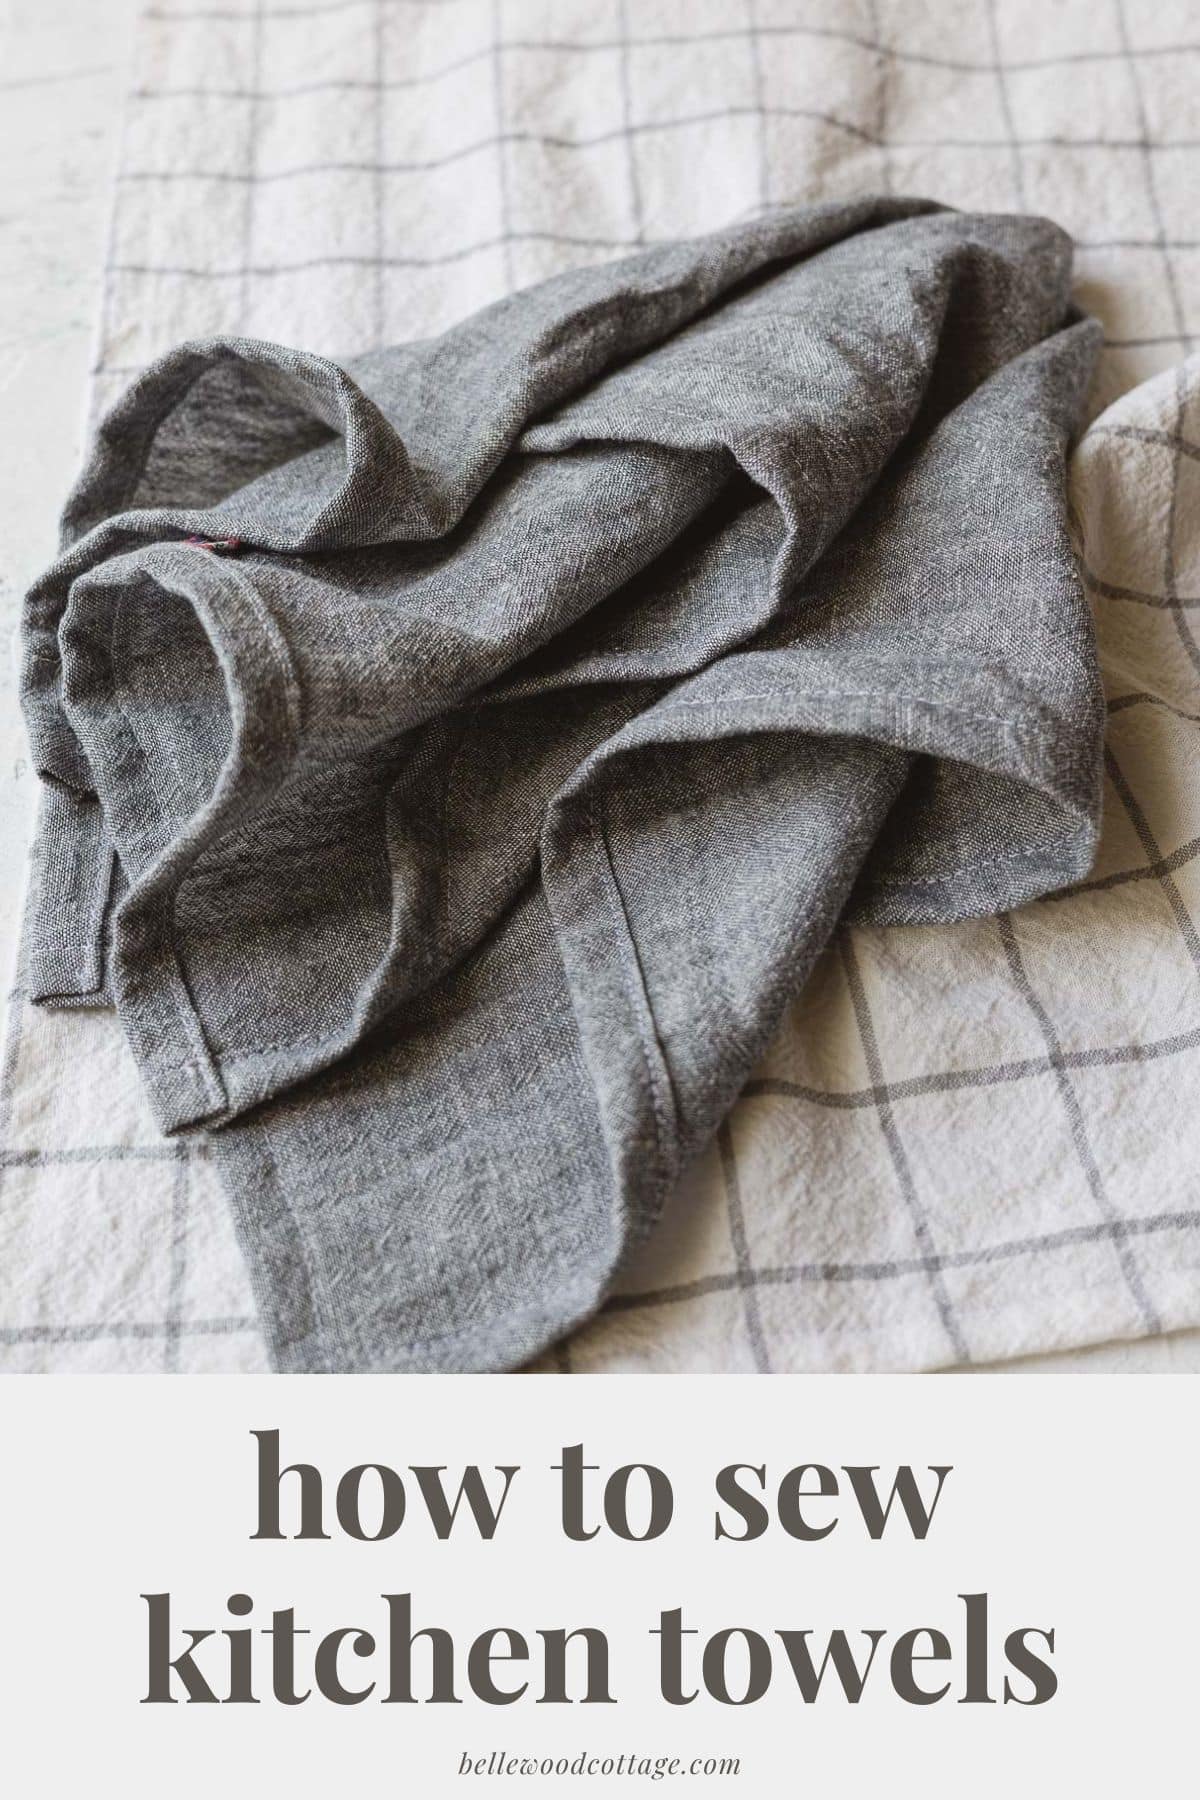 https://bellewoodcottage.com/wp-content/uploads/2022/06/How-to-Sew-Kitchen-Towels.jpg